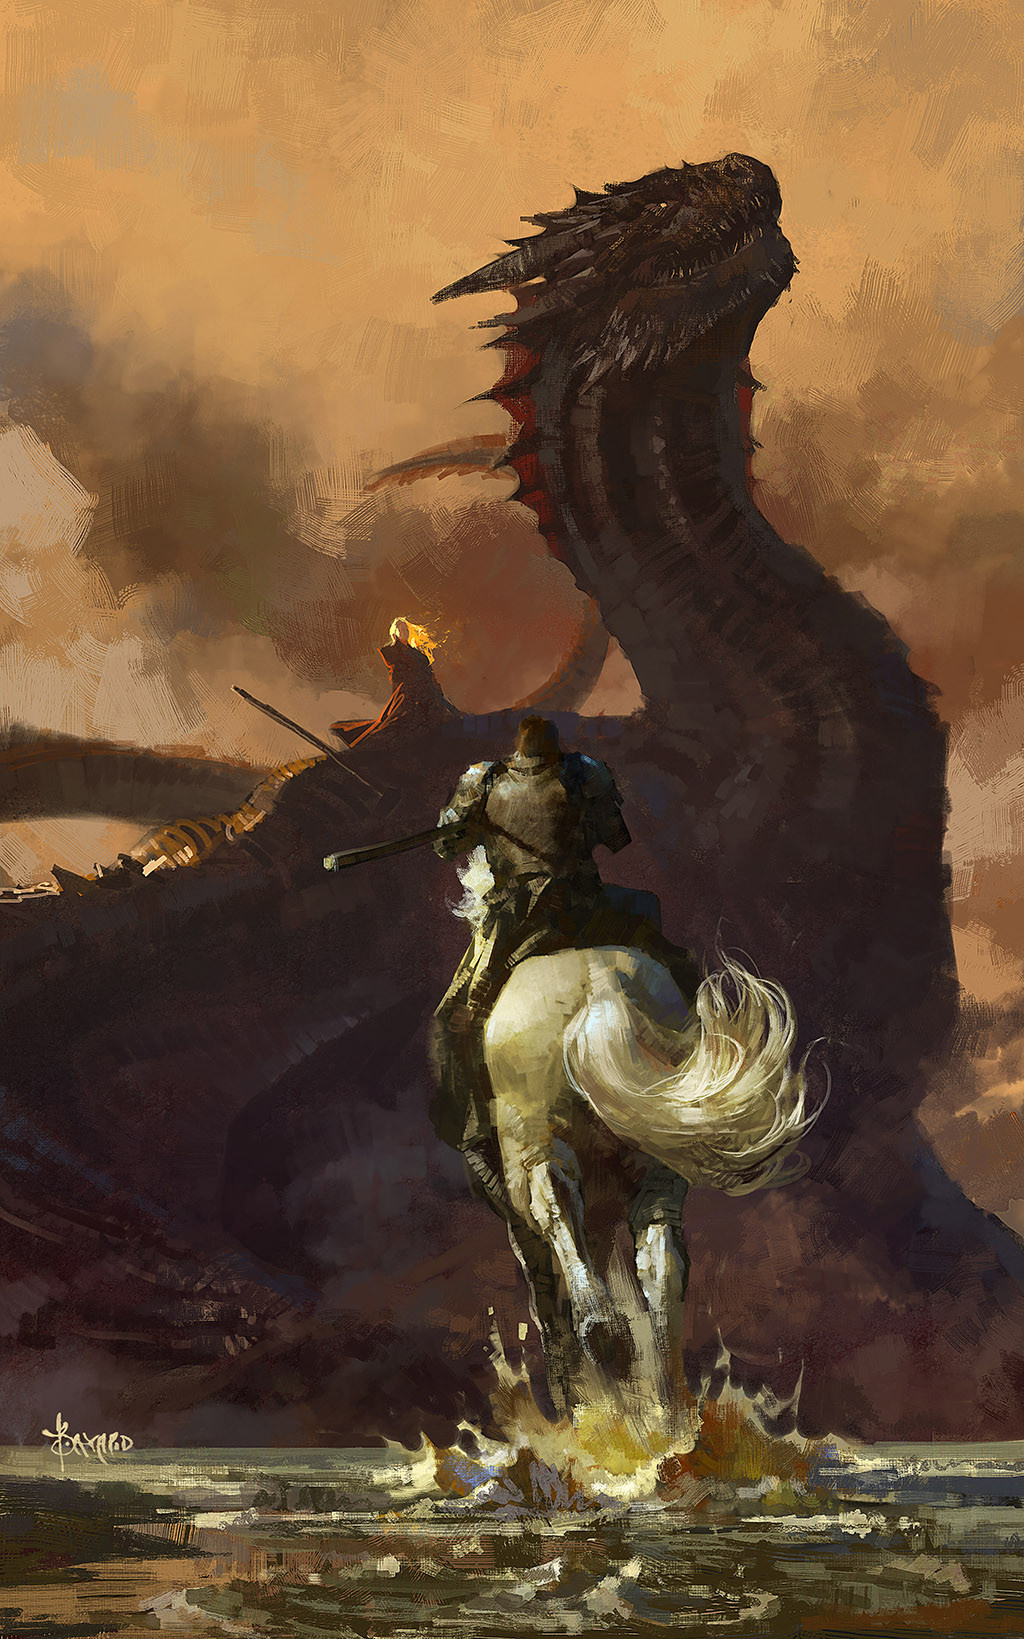 1boy 1girl a_song_of_ice_and_fire armor artist_name bayard_wu breastplate charging_forward cloud cloudy_sky commentary daenerys_targaryen dragon dragon_riding drogon english_commentary facing_away fantasy game_of_thrones highres horns horse horseback_riding jaime_lannister open_mouth orange_sky outdoors painterly pauldrons realistic riding sharp_teeth shoulder_armor sky tail teeth water western_dragon wide_shot wings yellow_eyes